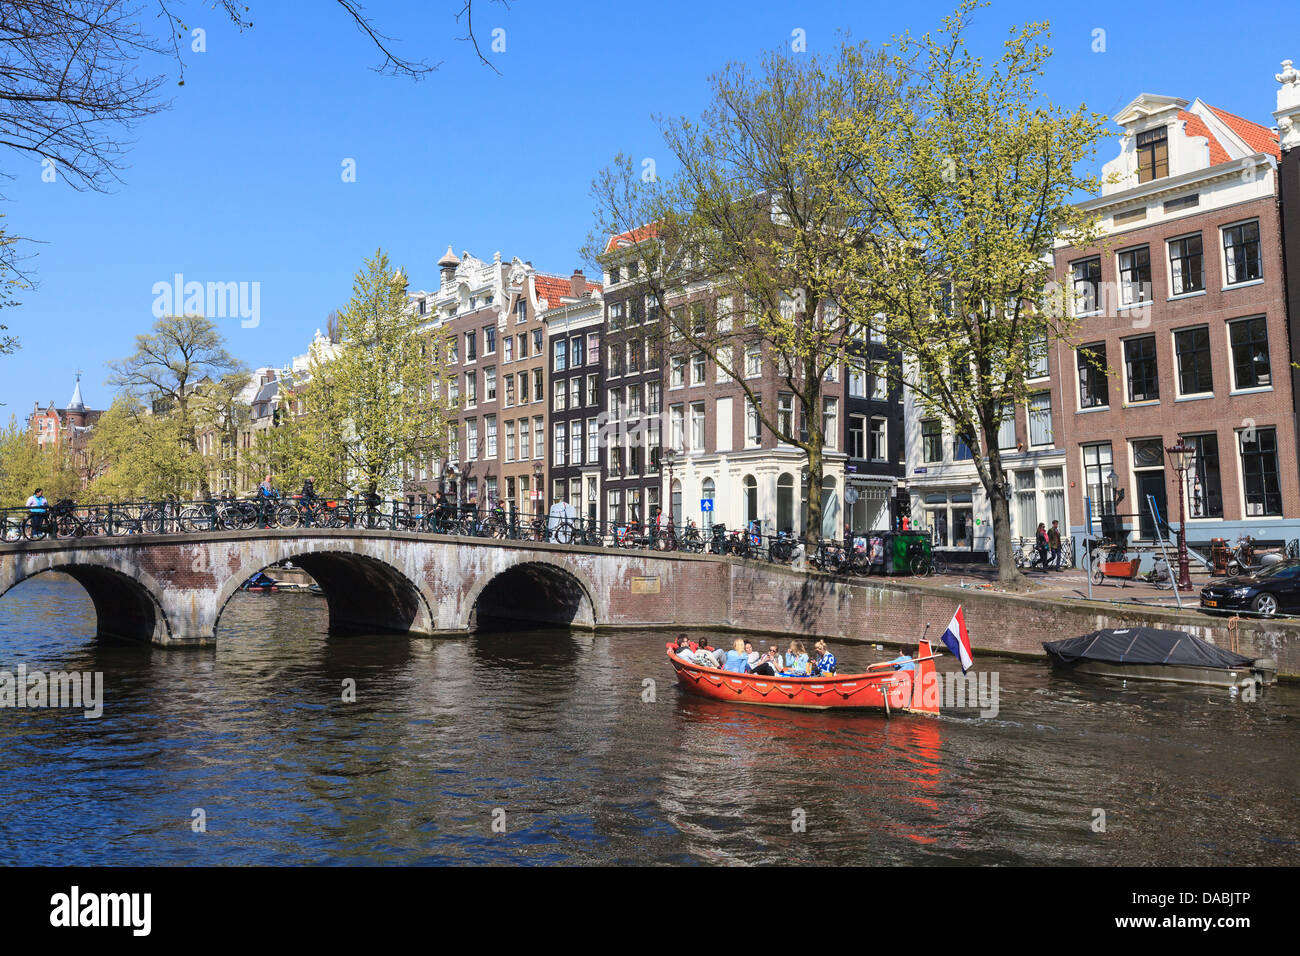 Canal Keizersgracht, Amsterdam, Pays-Bas, Europe Banque D'Images